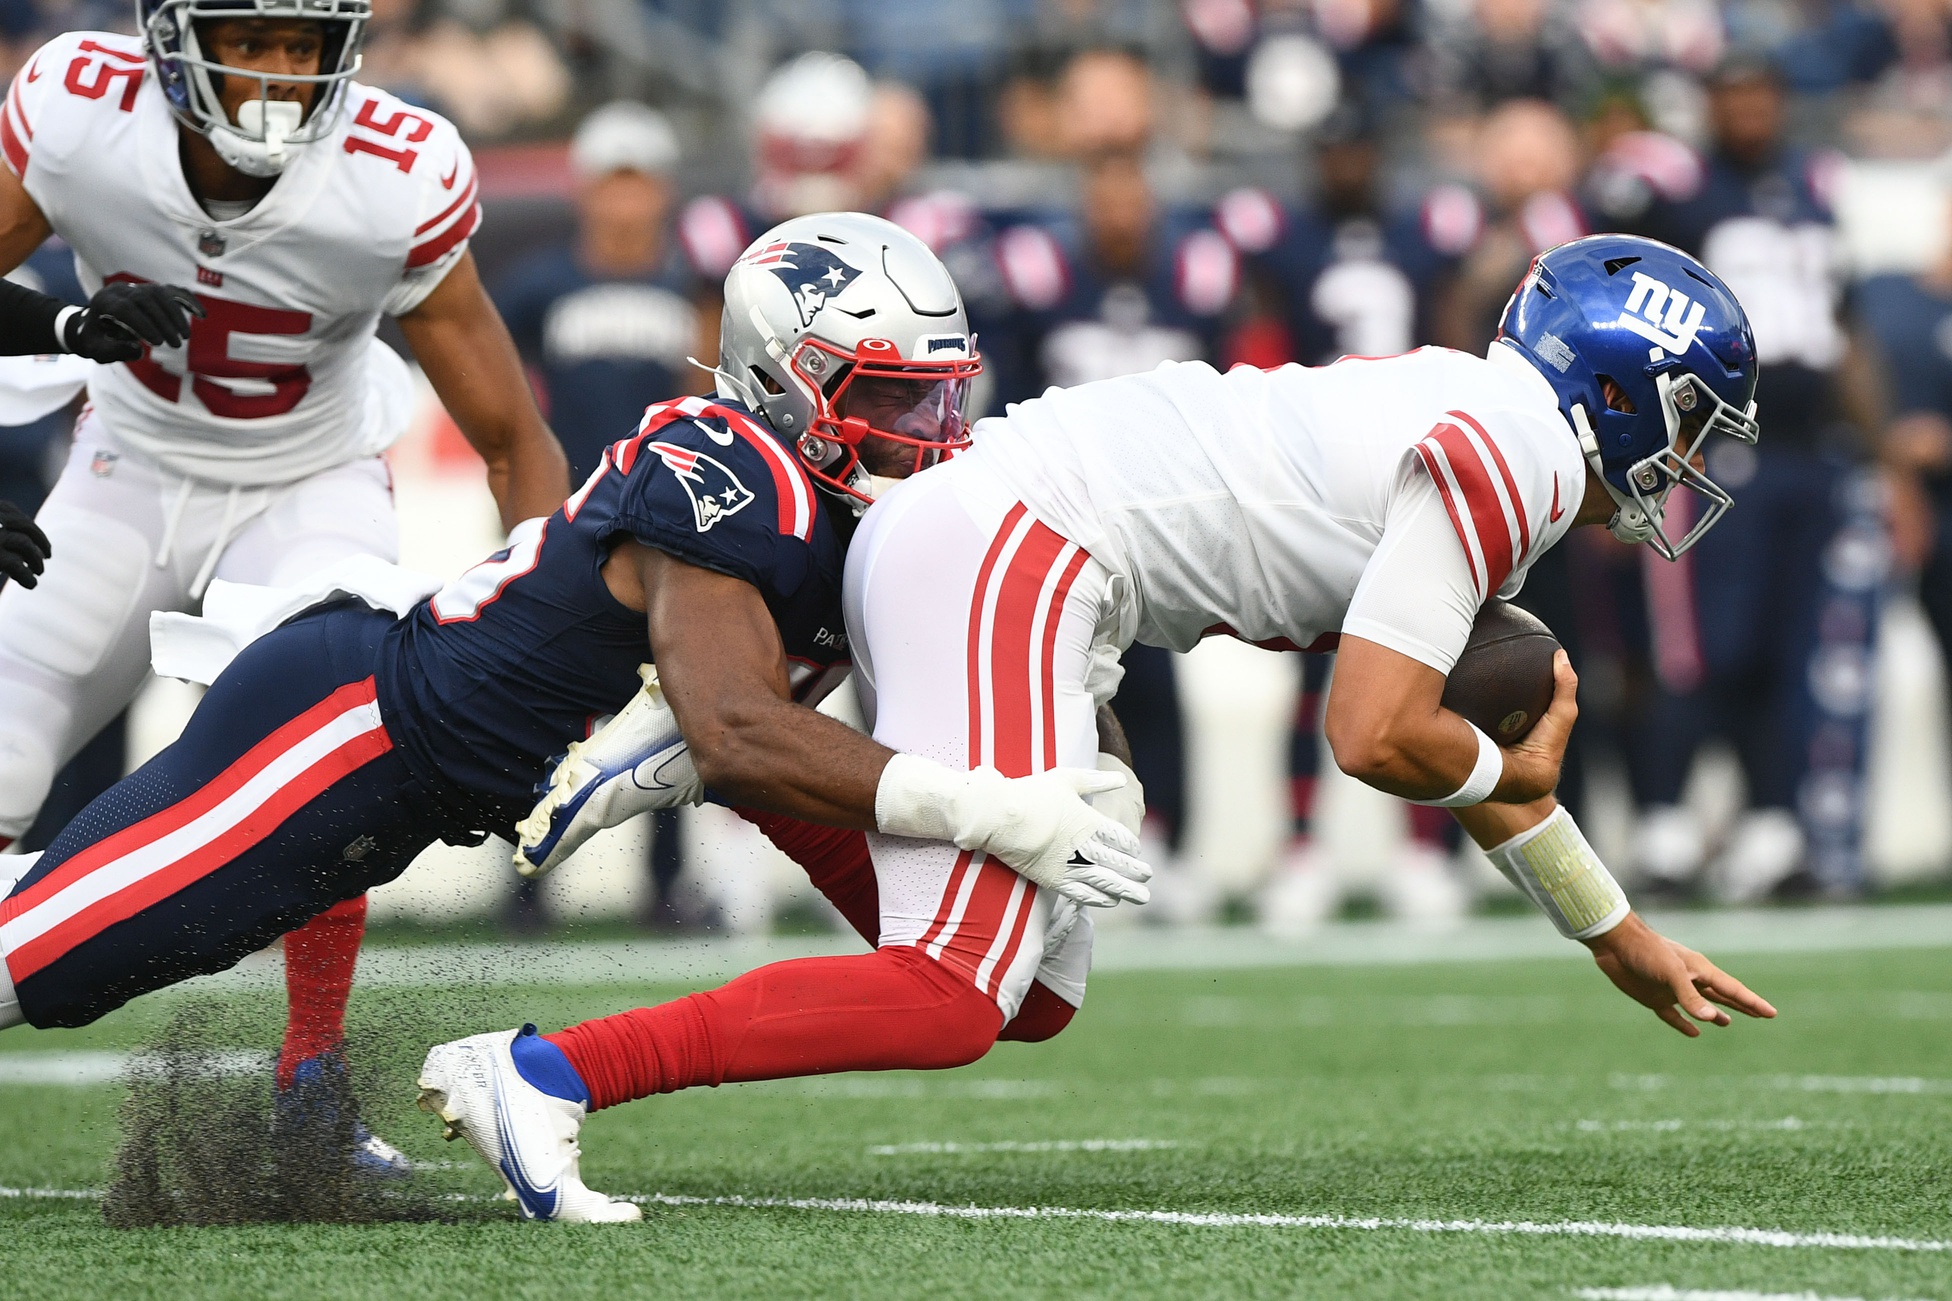 Aug 11, 2022; Foxborough, Massachusetts, USA; New England Patriots linebacker Josh Uche (55) tackles New York Giants quarterback Daniel Jones (8) during the first half in a prison game at Gillette Stadium. Credit: Brian Fluharty-USA TODAY Sports